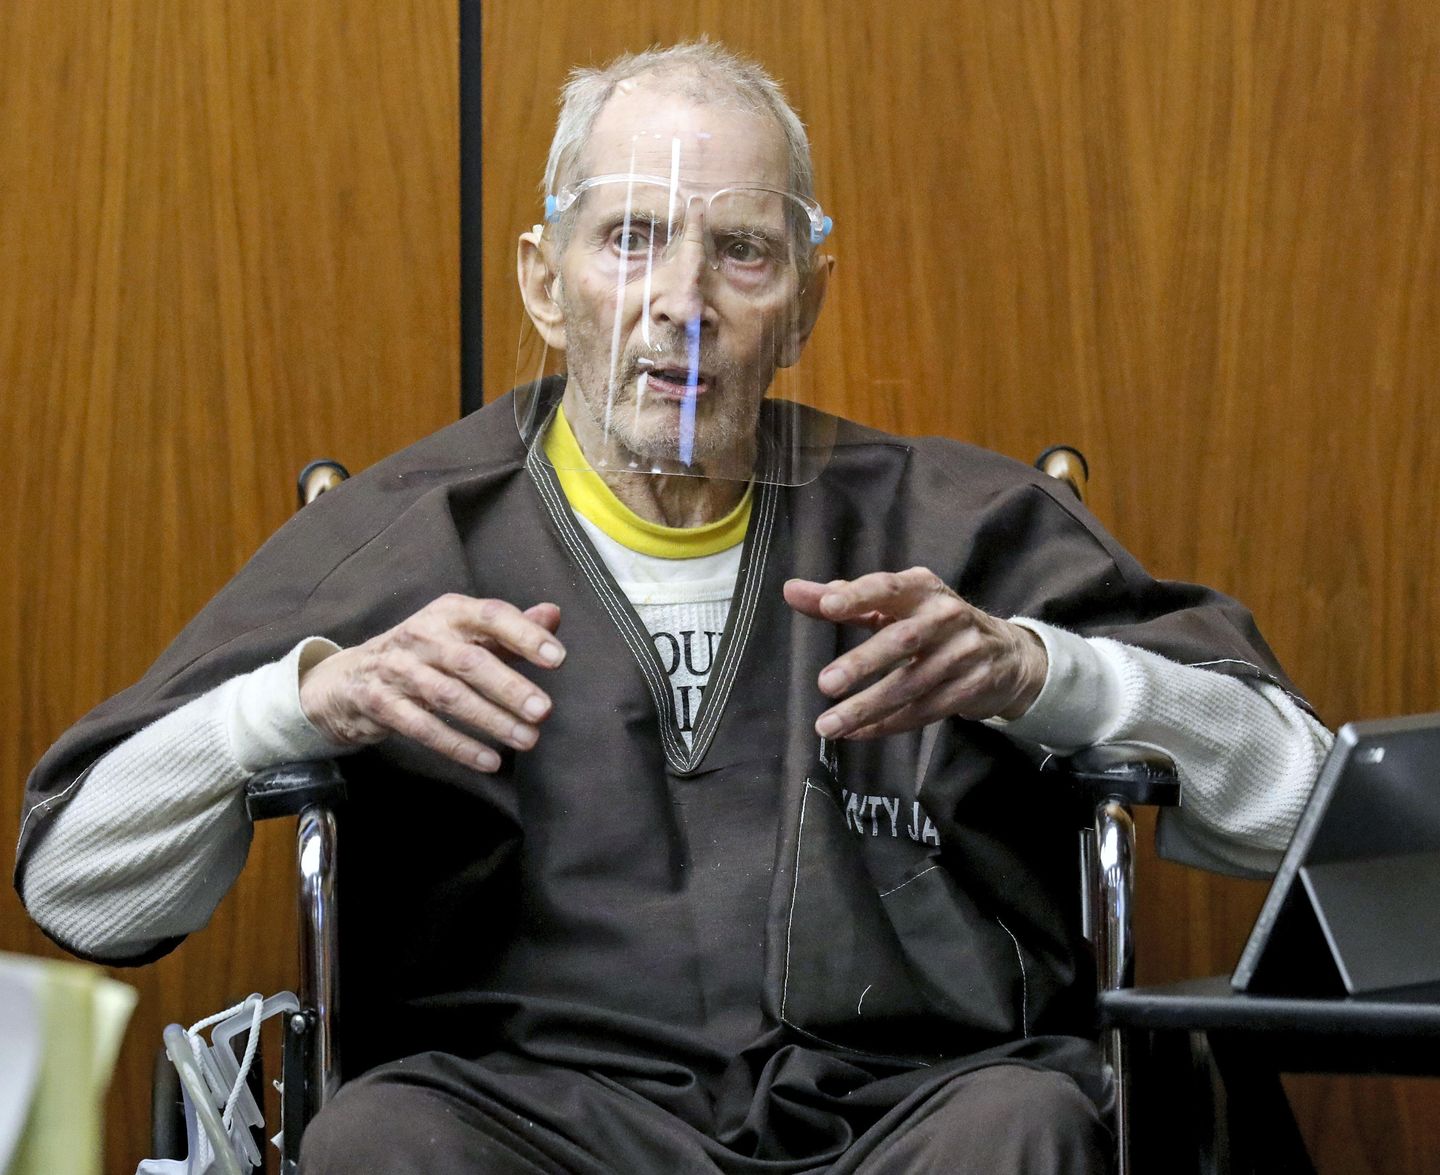 Robert Durst sentenced to life in prison without parole